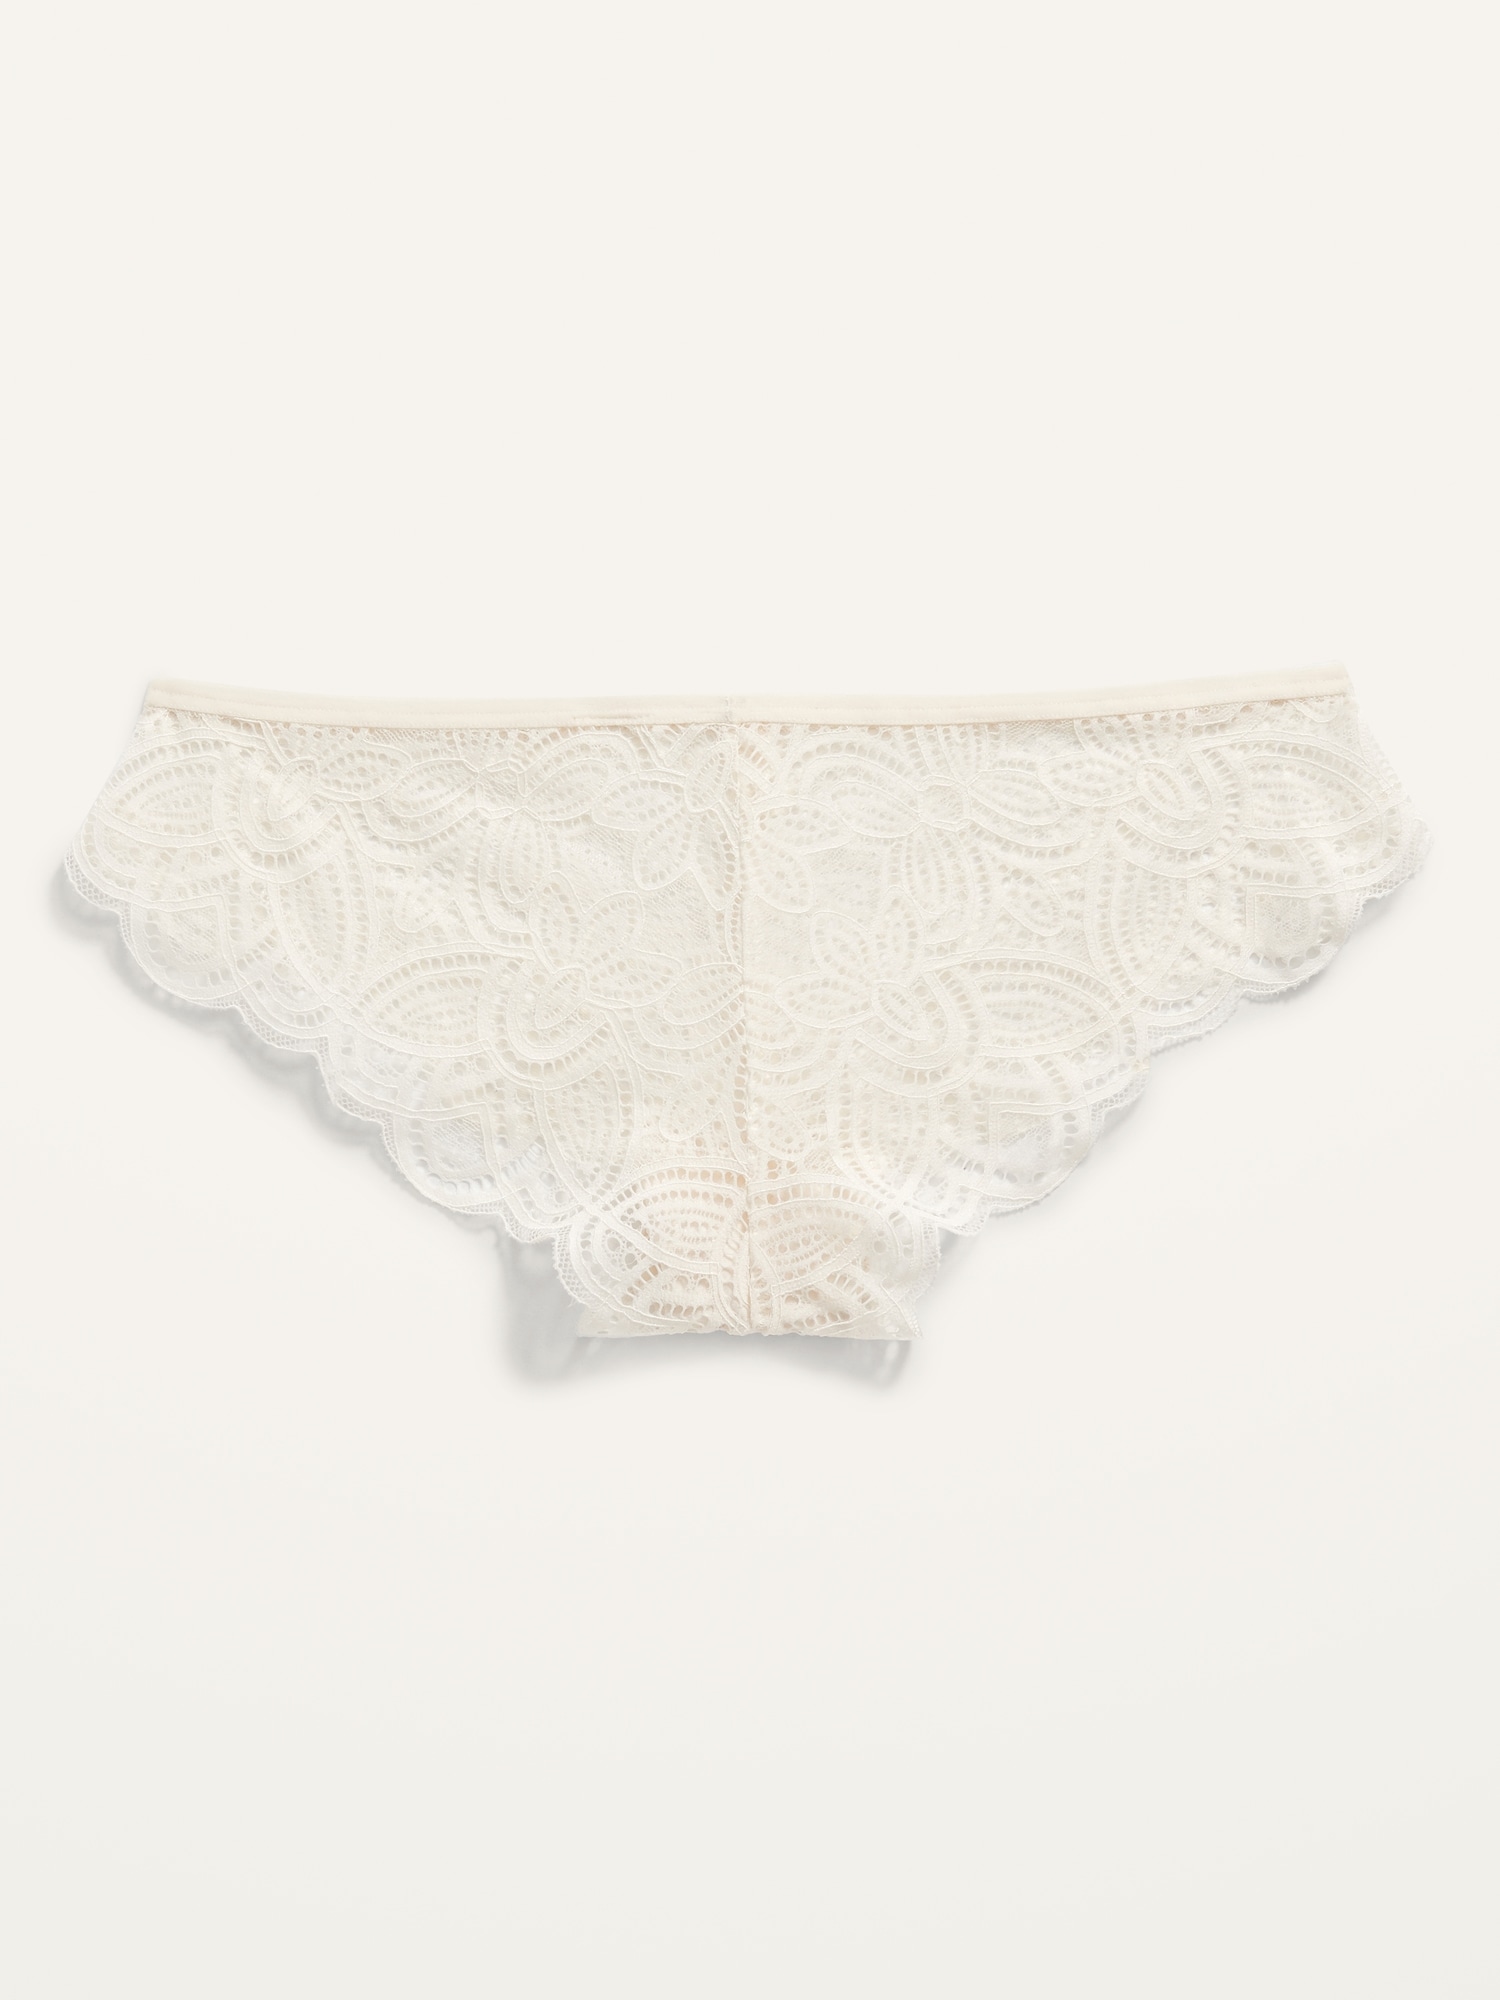 Lace Cheeky Thong Underwear for Women | Old Navy